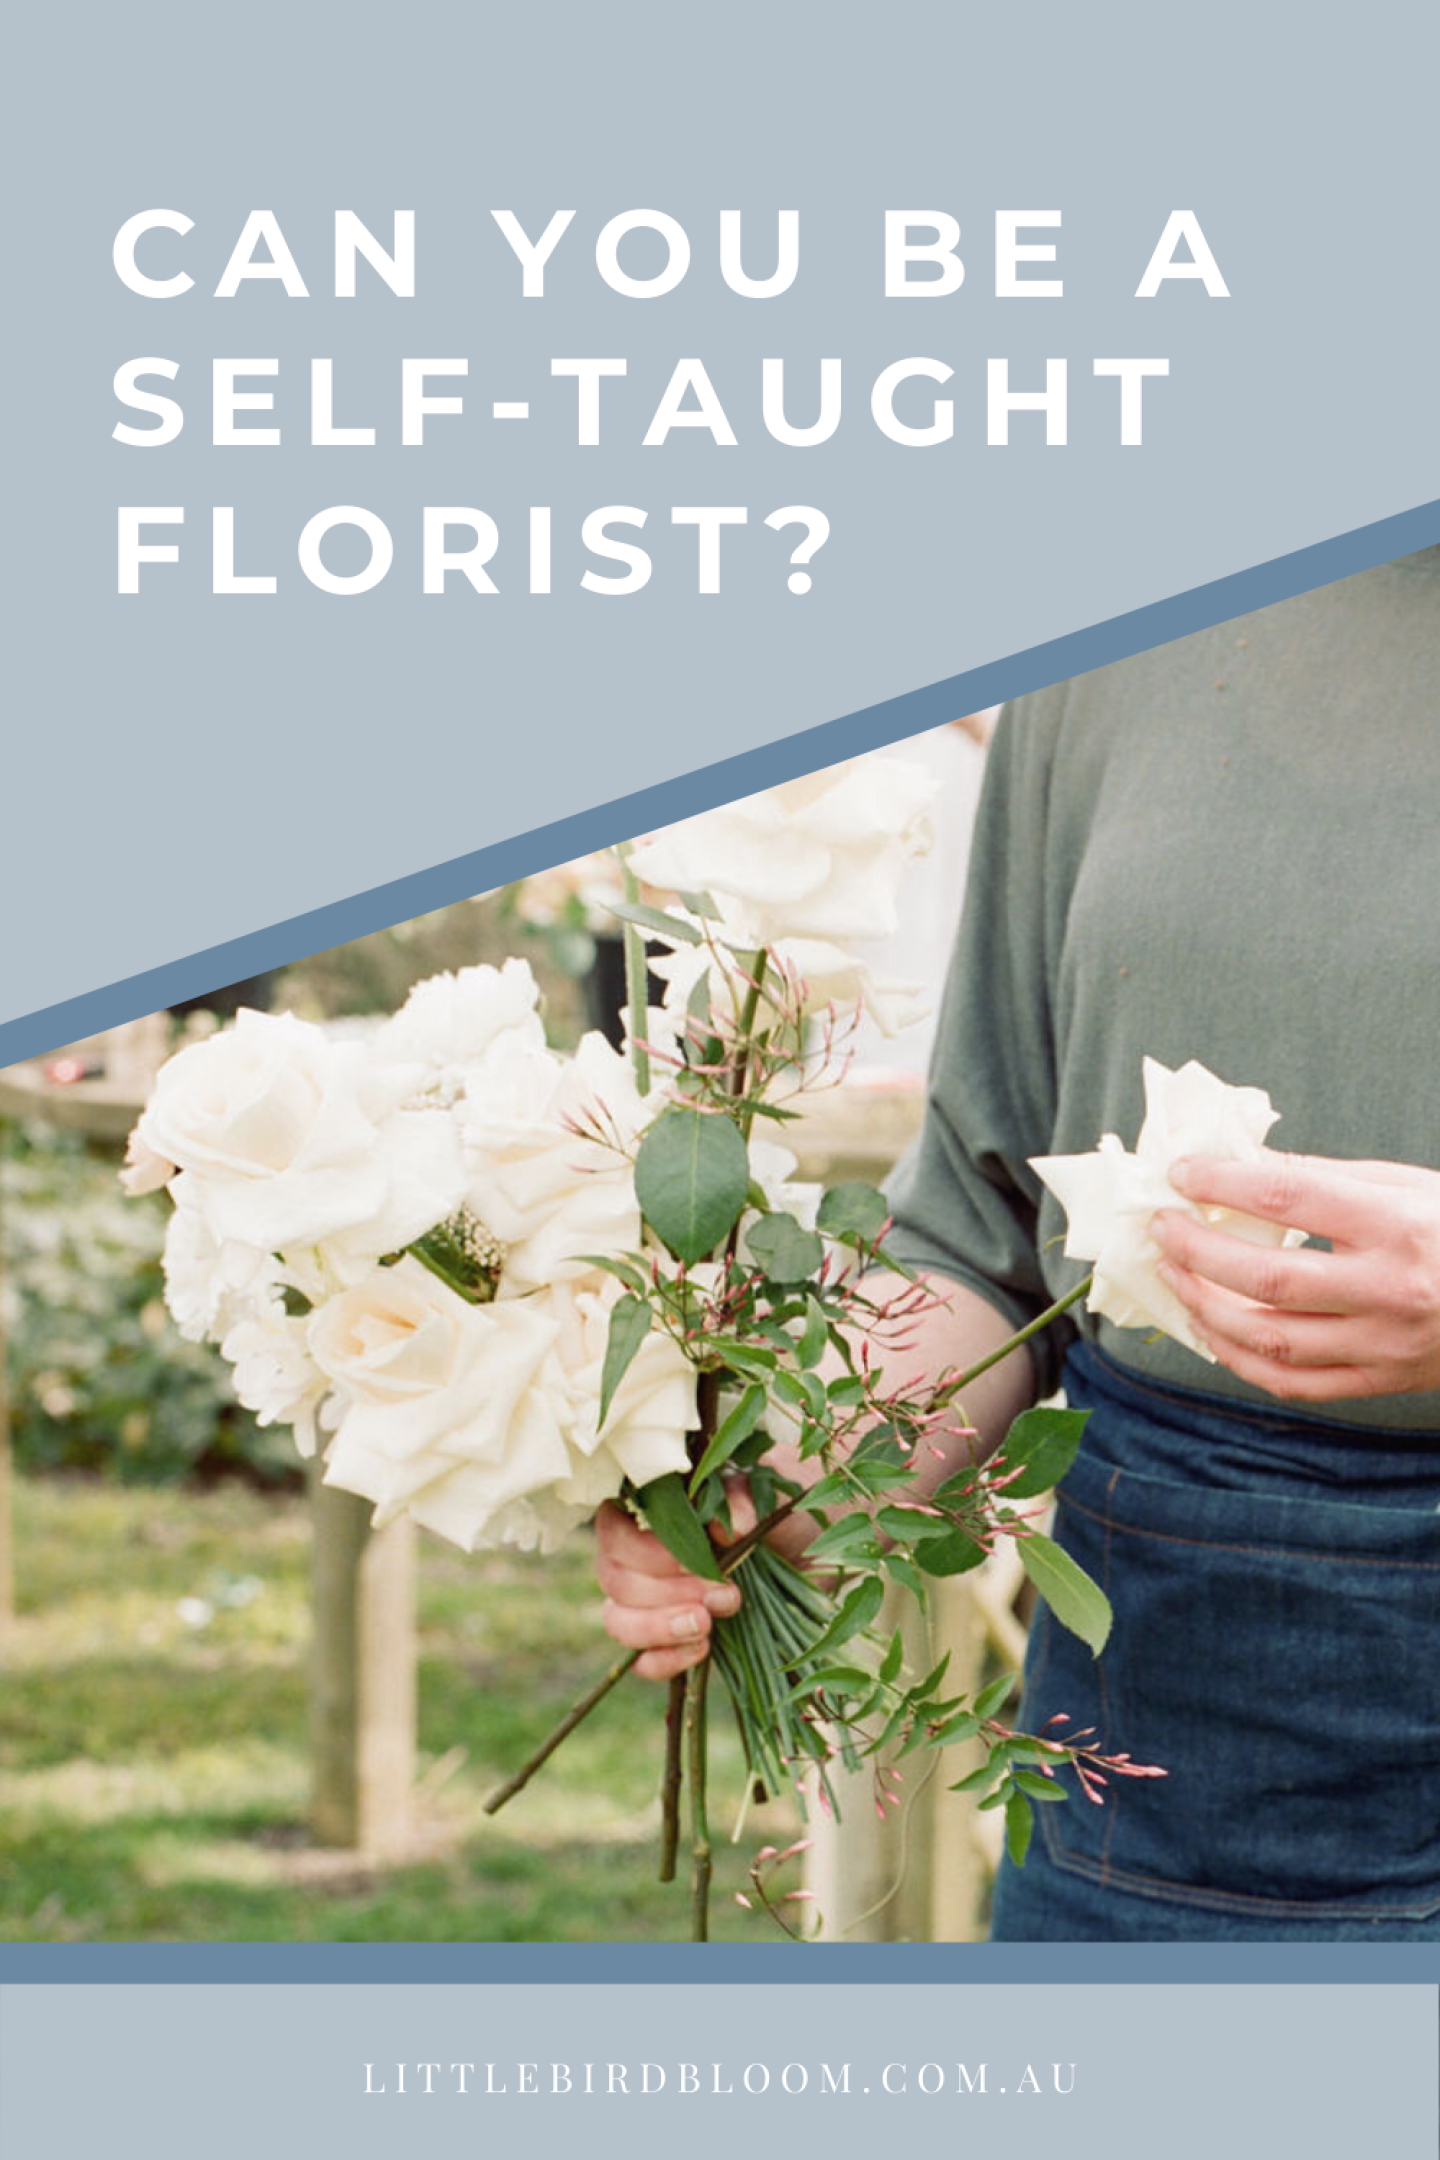 BLOG POST: CAN YOU BE A SELF TAUGHT FLORIST?